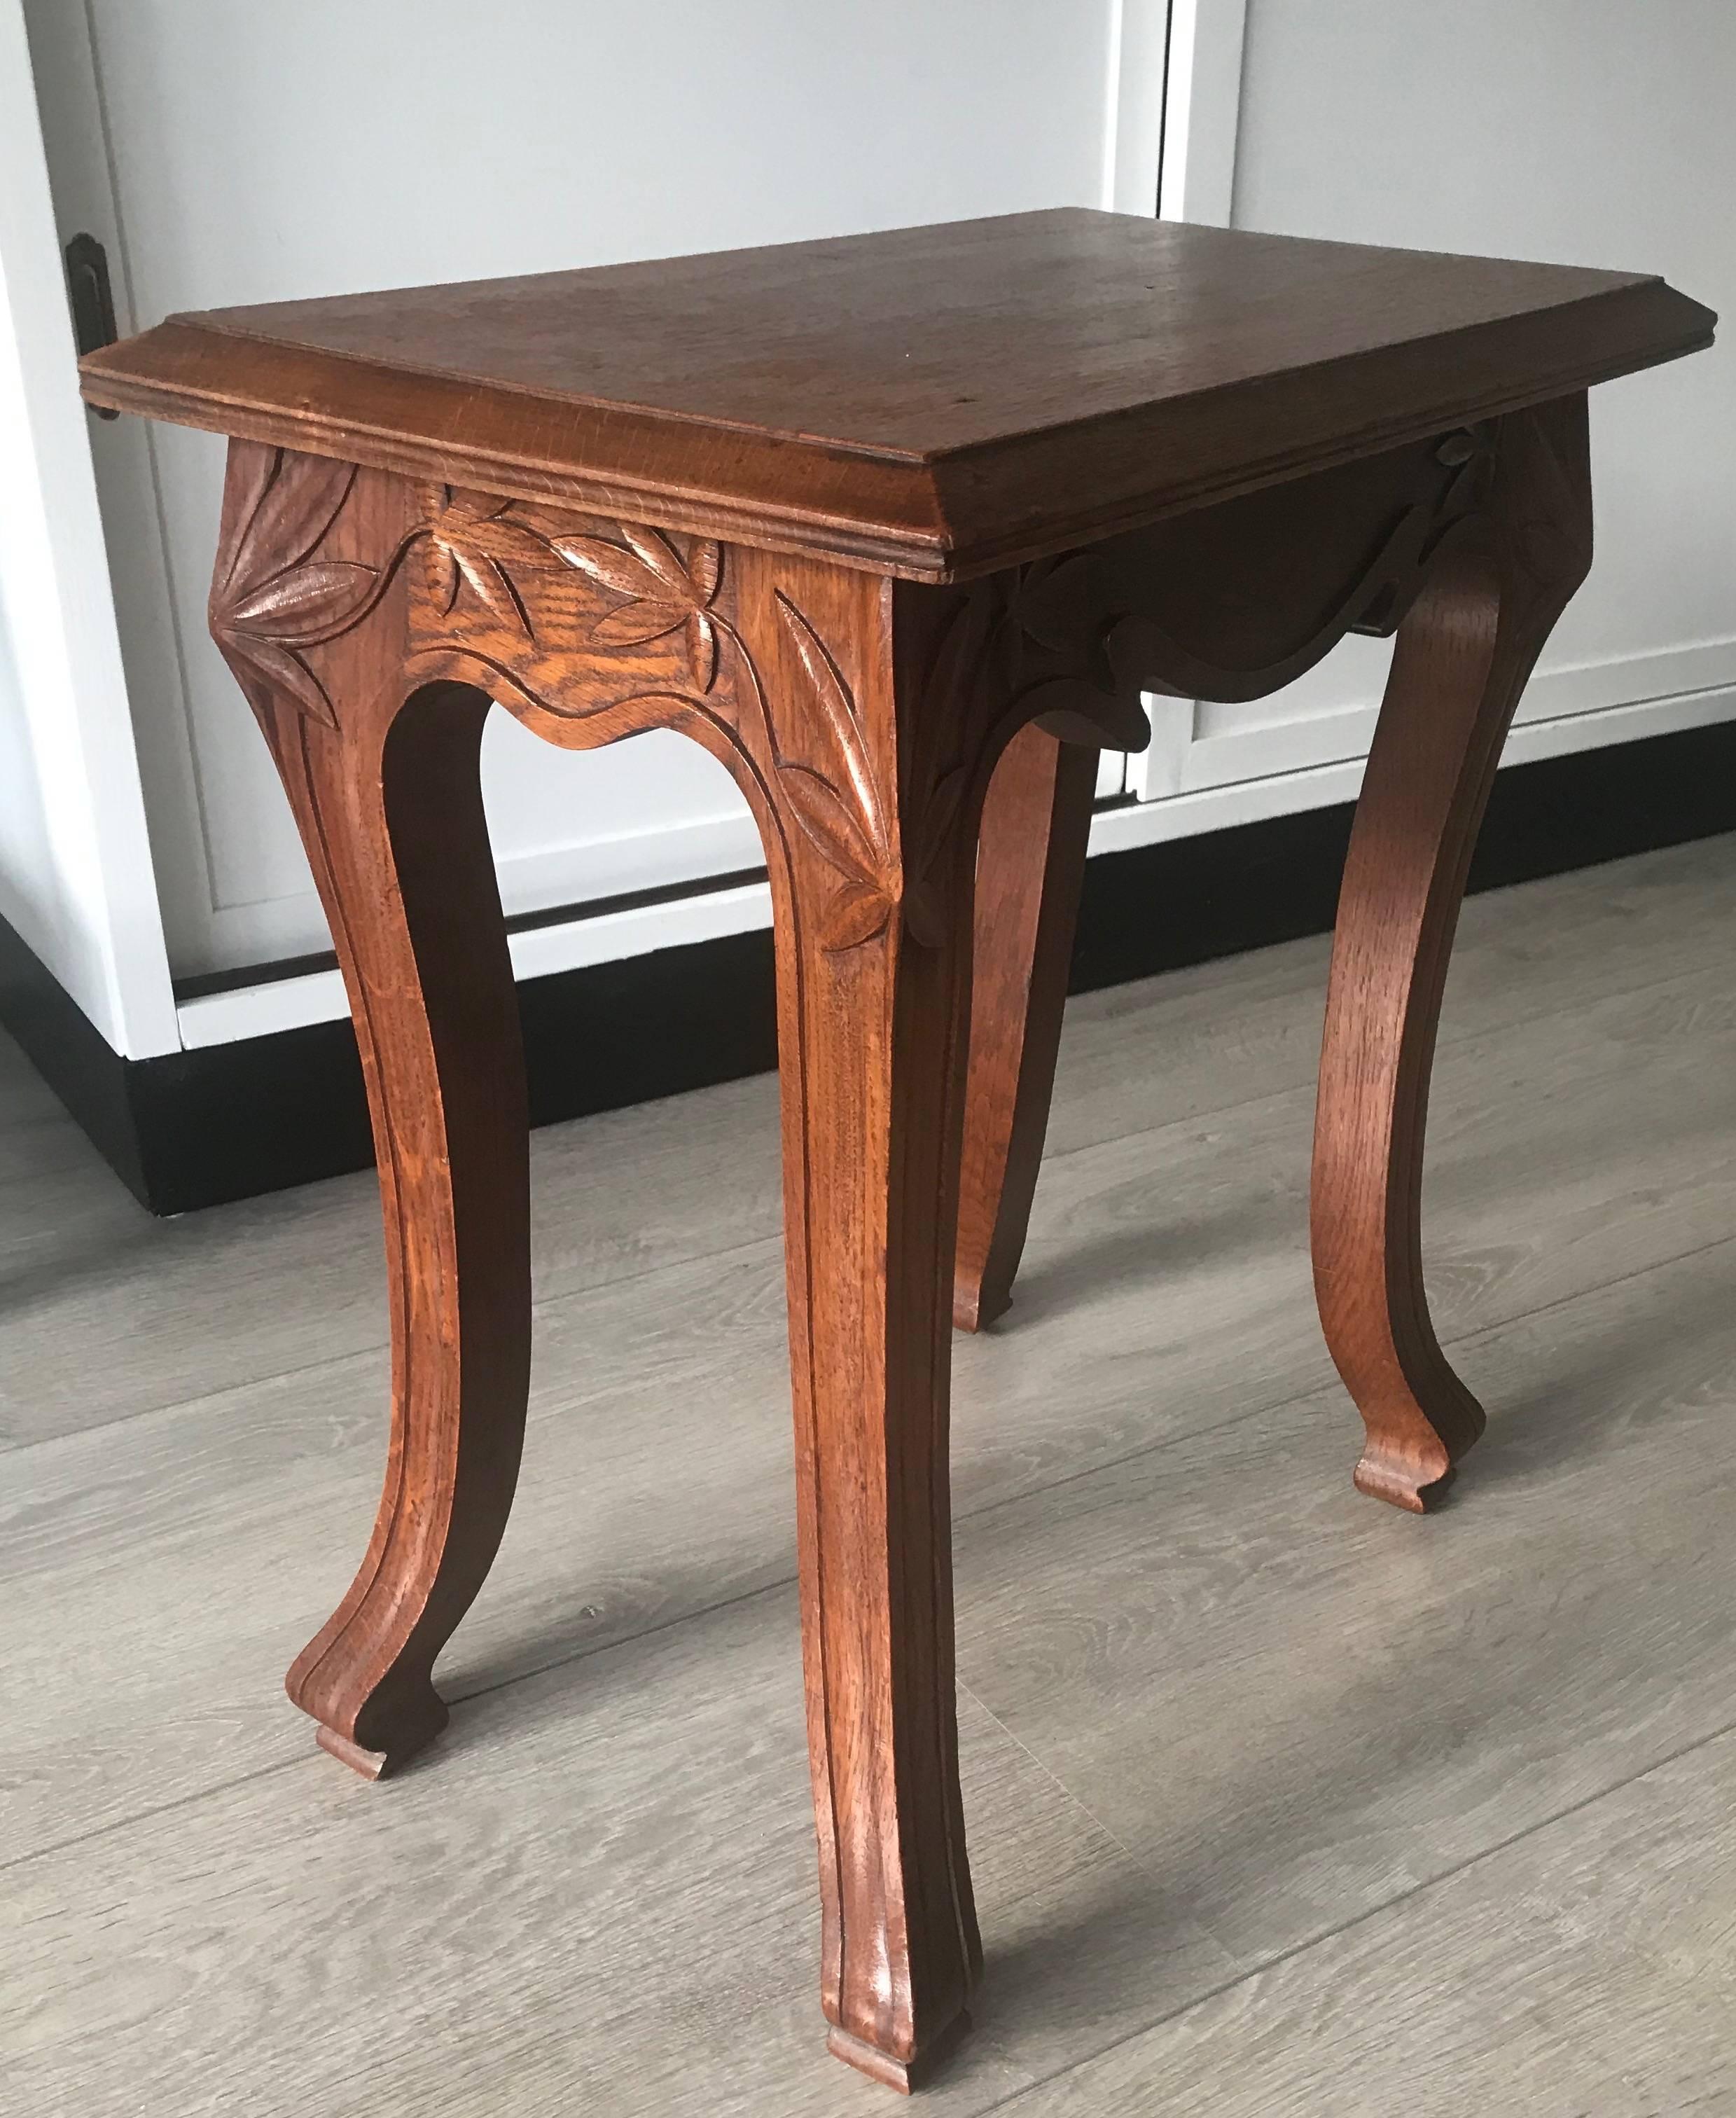 Hand-Crafted Early 20th Century Quality Carved Small Jugendstil End or Side Table or Stand